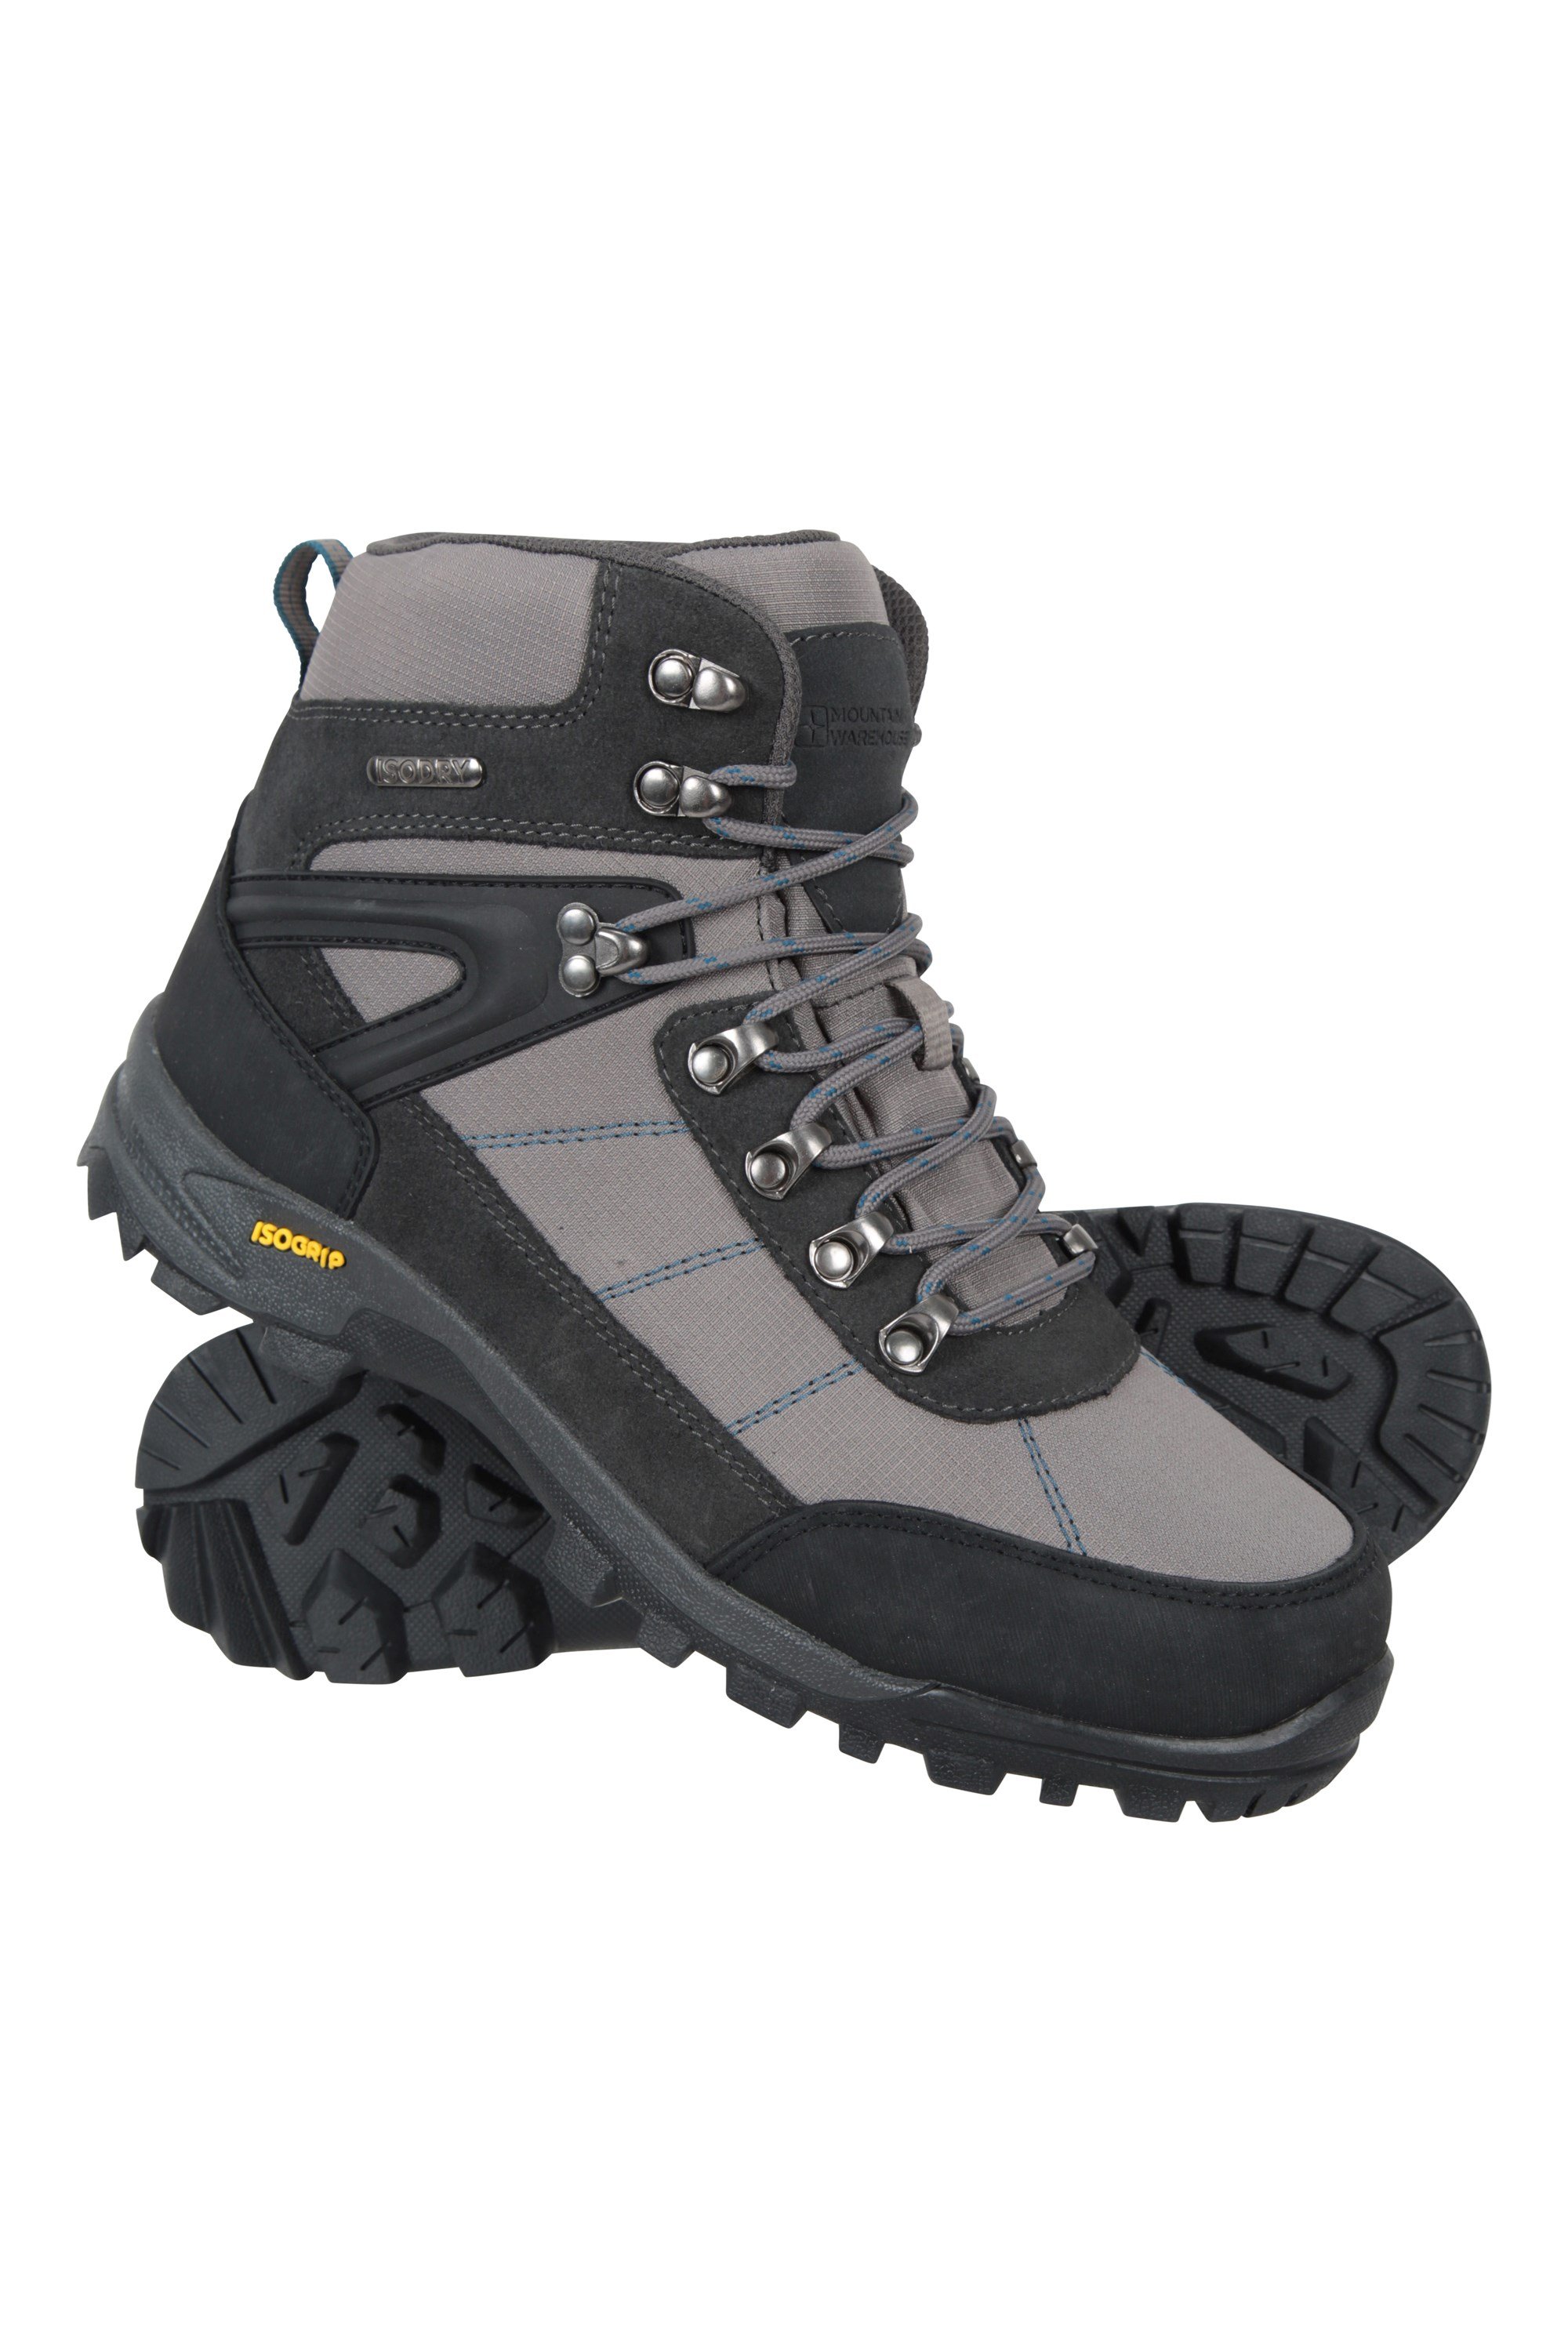 Extreme Storm Mens Waterproof IsoGrip Boots - Grey